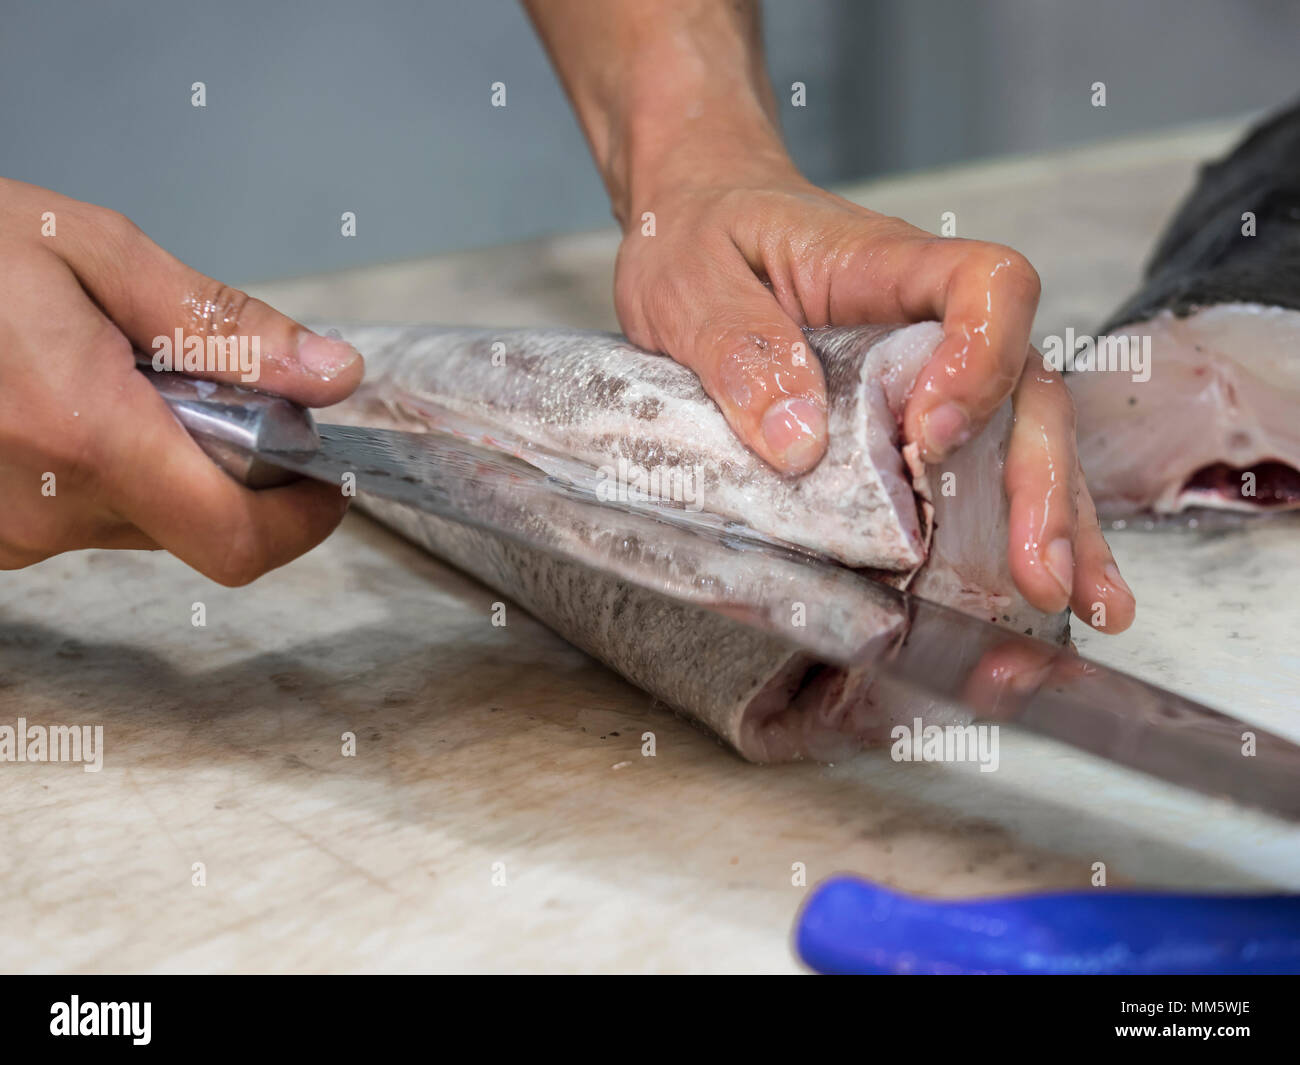 Man cutting fish with knife Stock Photo